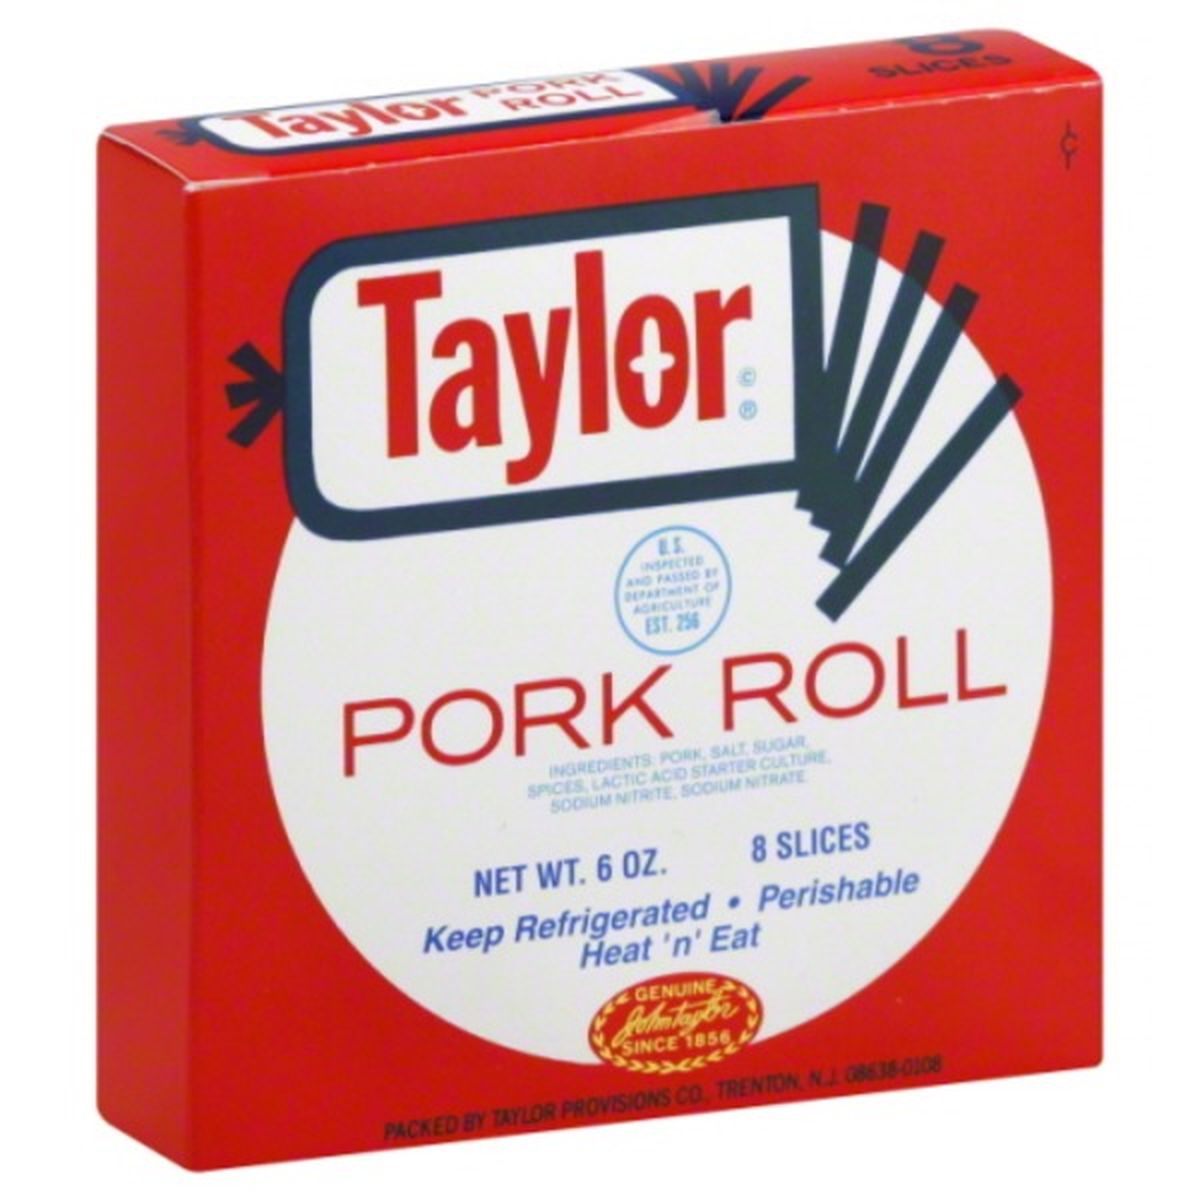 Calories in Taylor Pork Roll